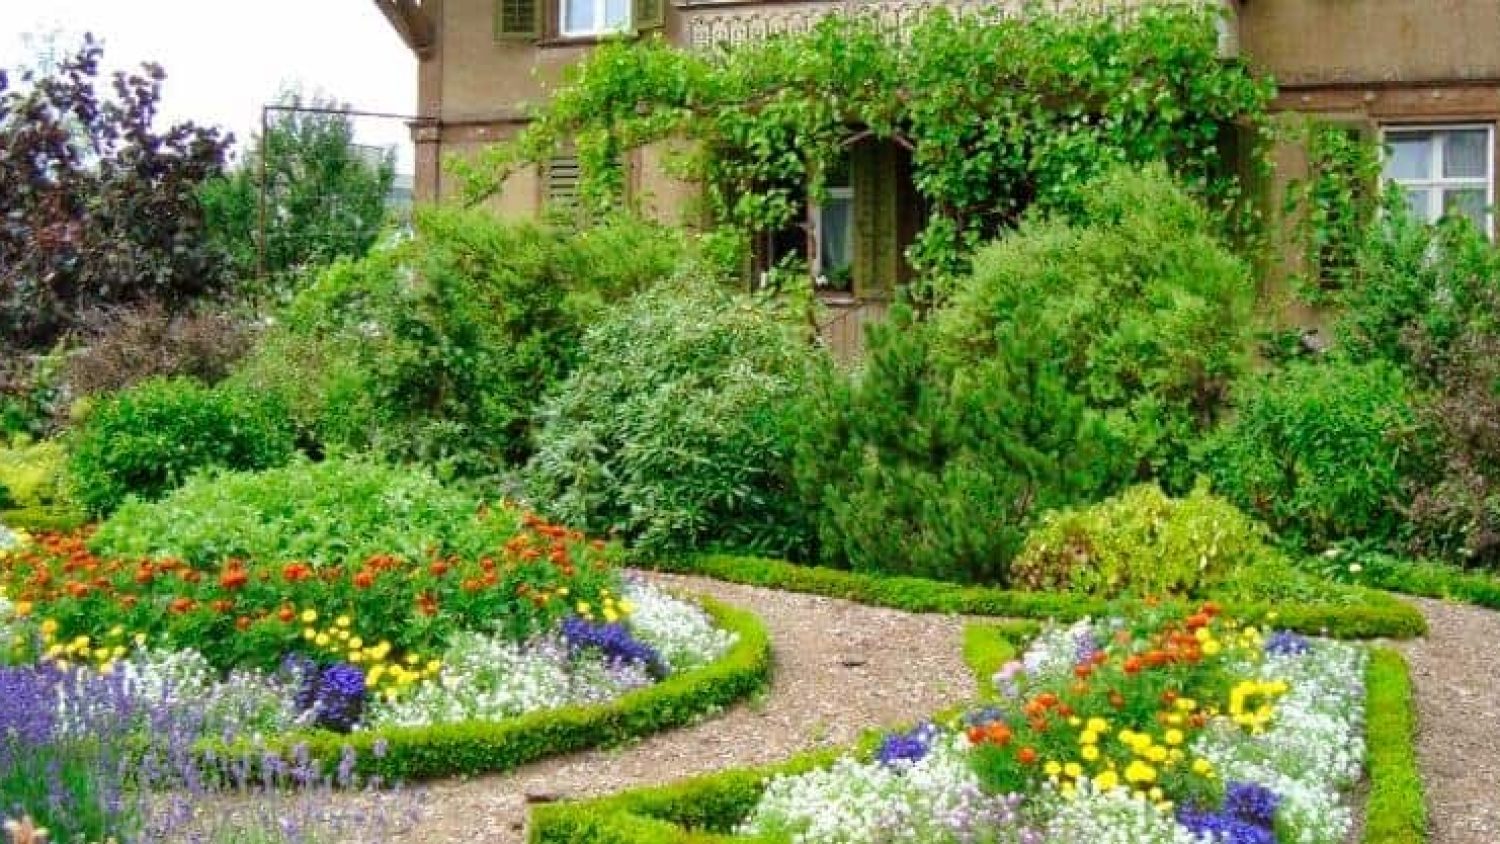 Cottage Garden Layouts: Design The Cottage Garden From Your Dreams